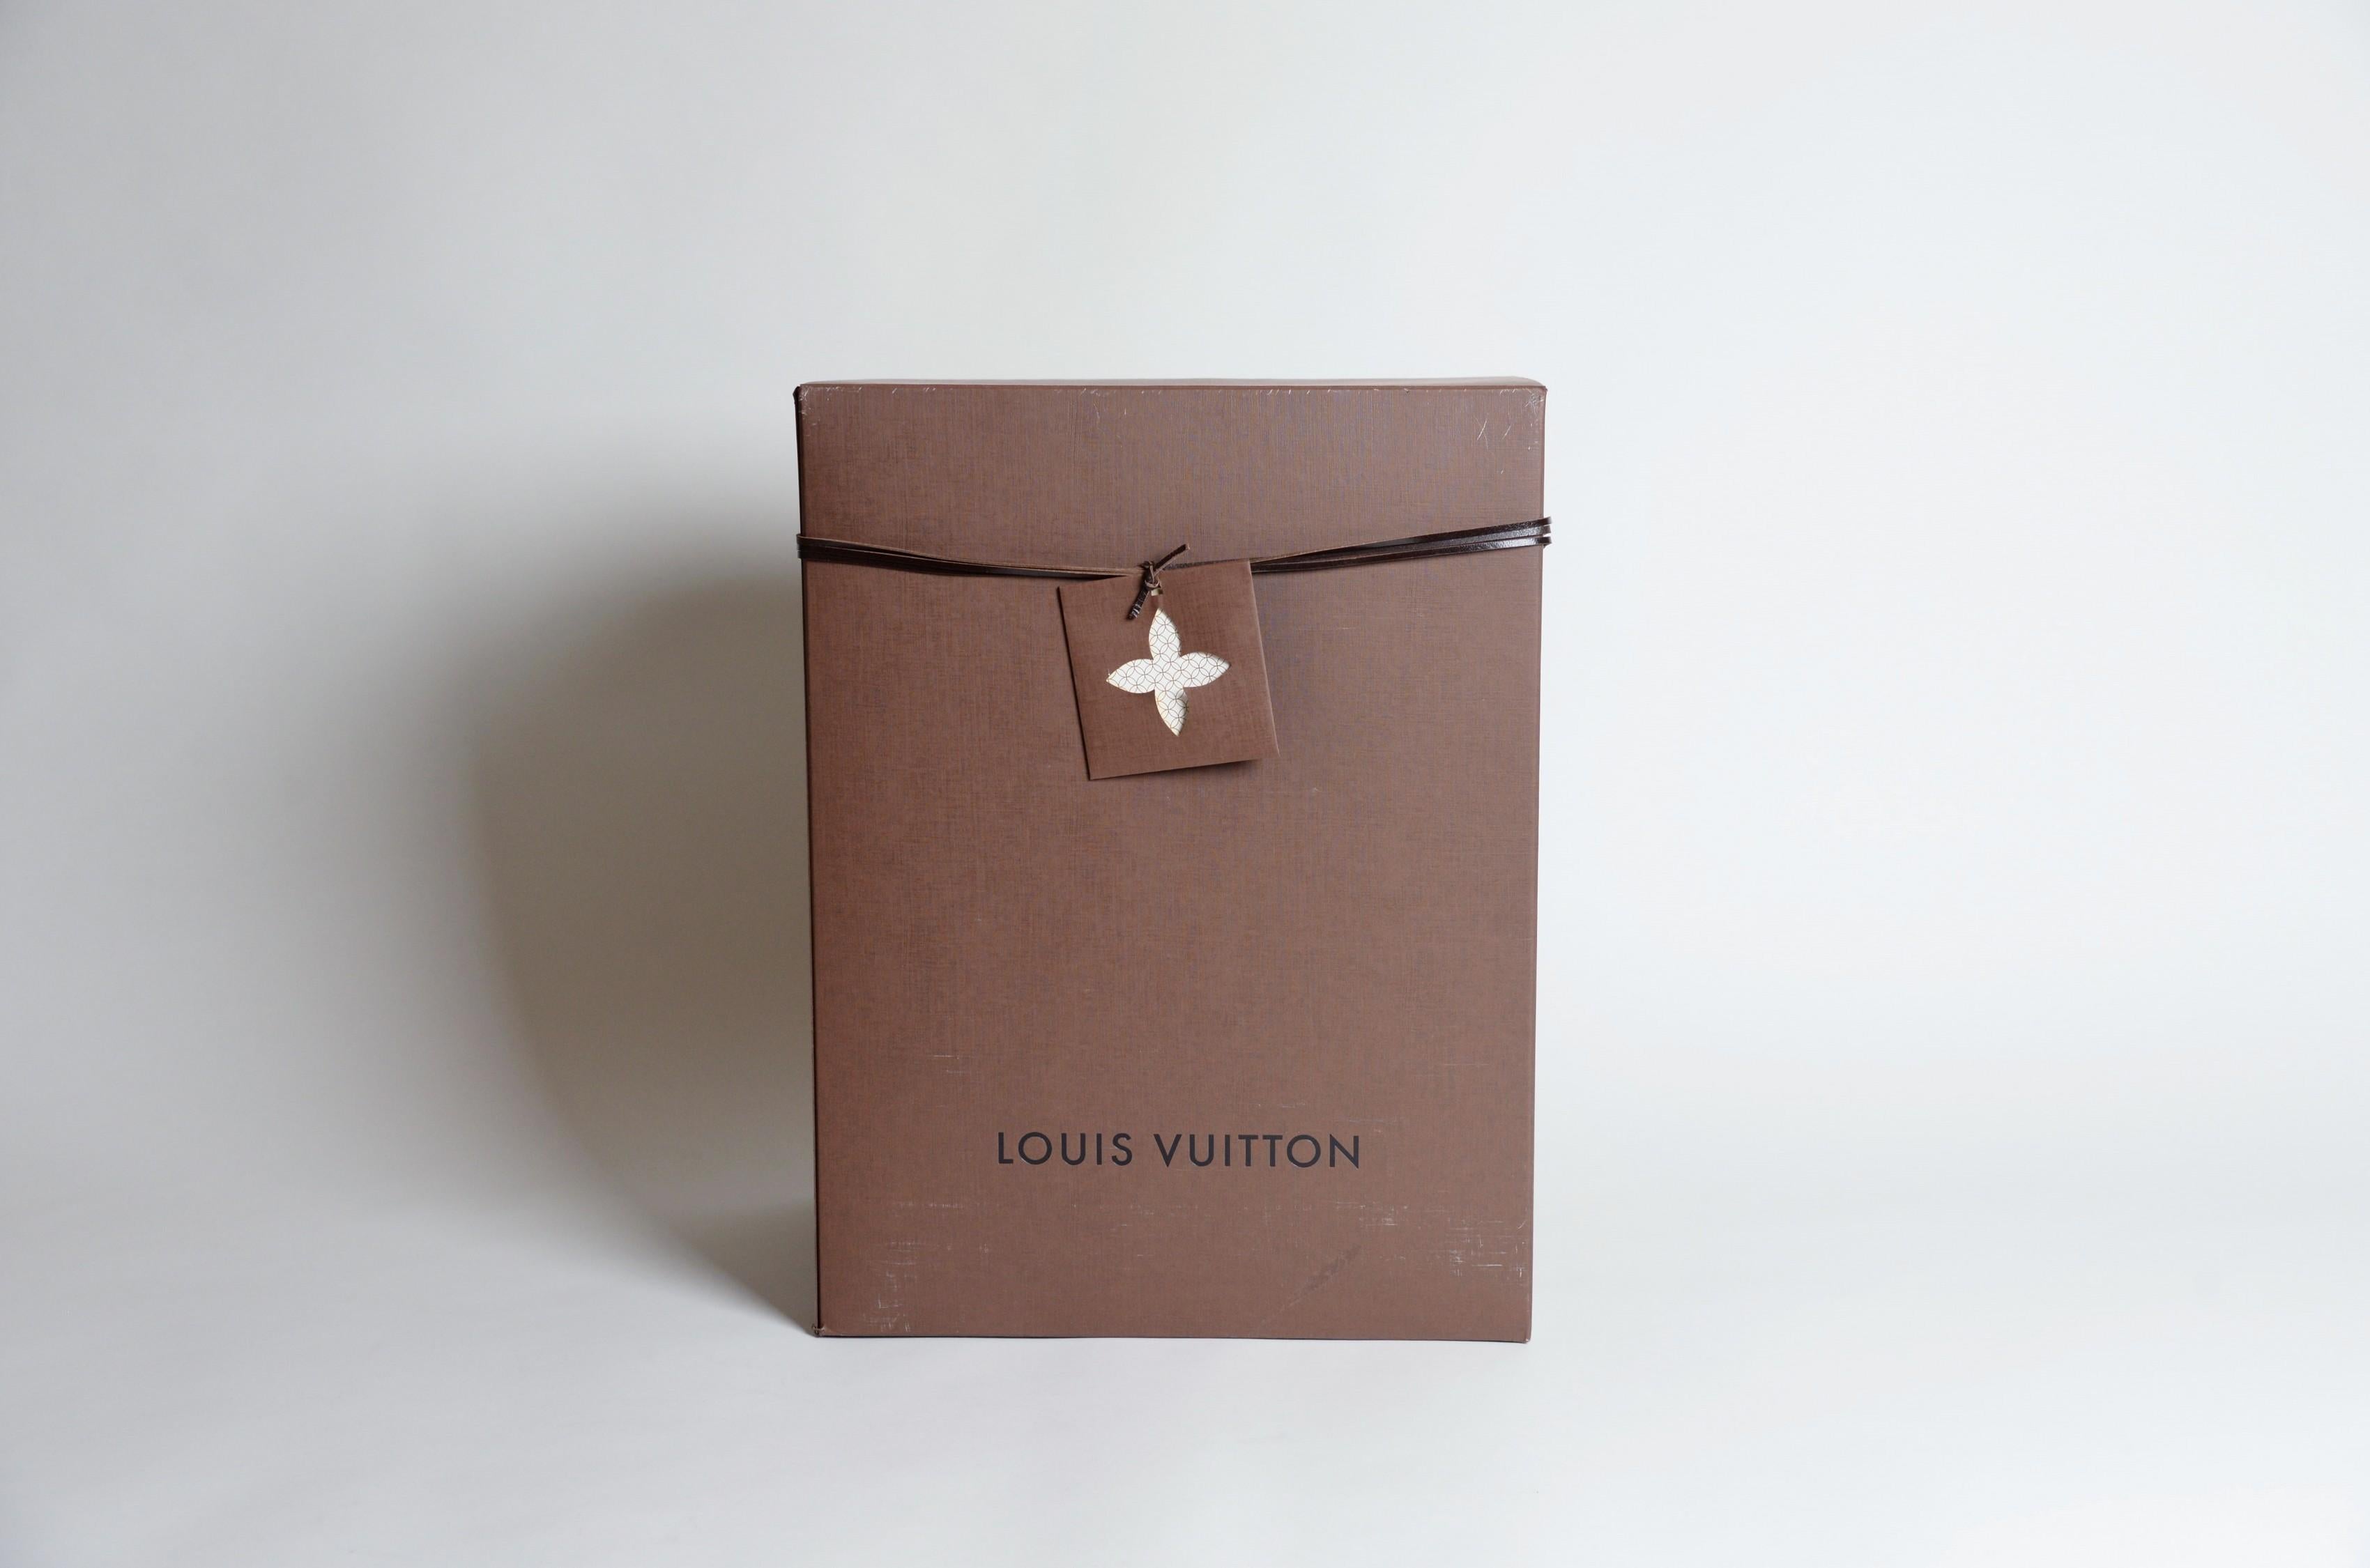 From the collection of Savineti we offer this super special Louis Vuitton limited edition Iconoclast bag:
-	Brand: Louis Vuitton
-	Model: from the Iconoclast collection by Christian Louboutin 
-	Year: 2014
-	Code: DR5124
-	Condition: Very good